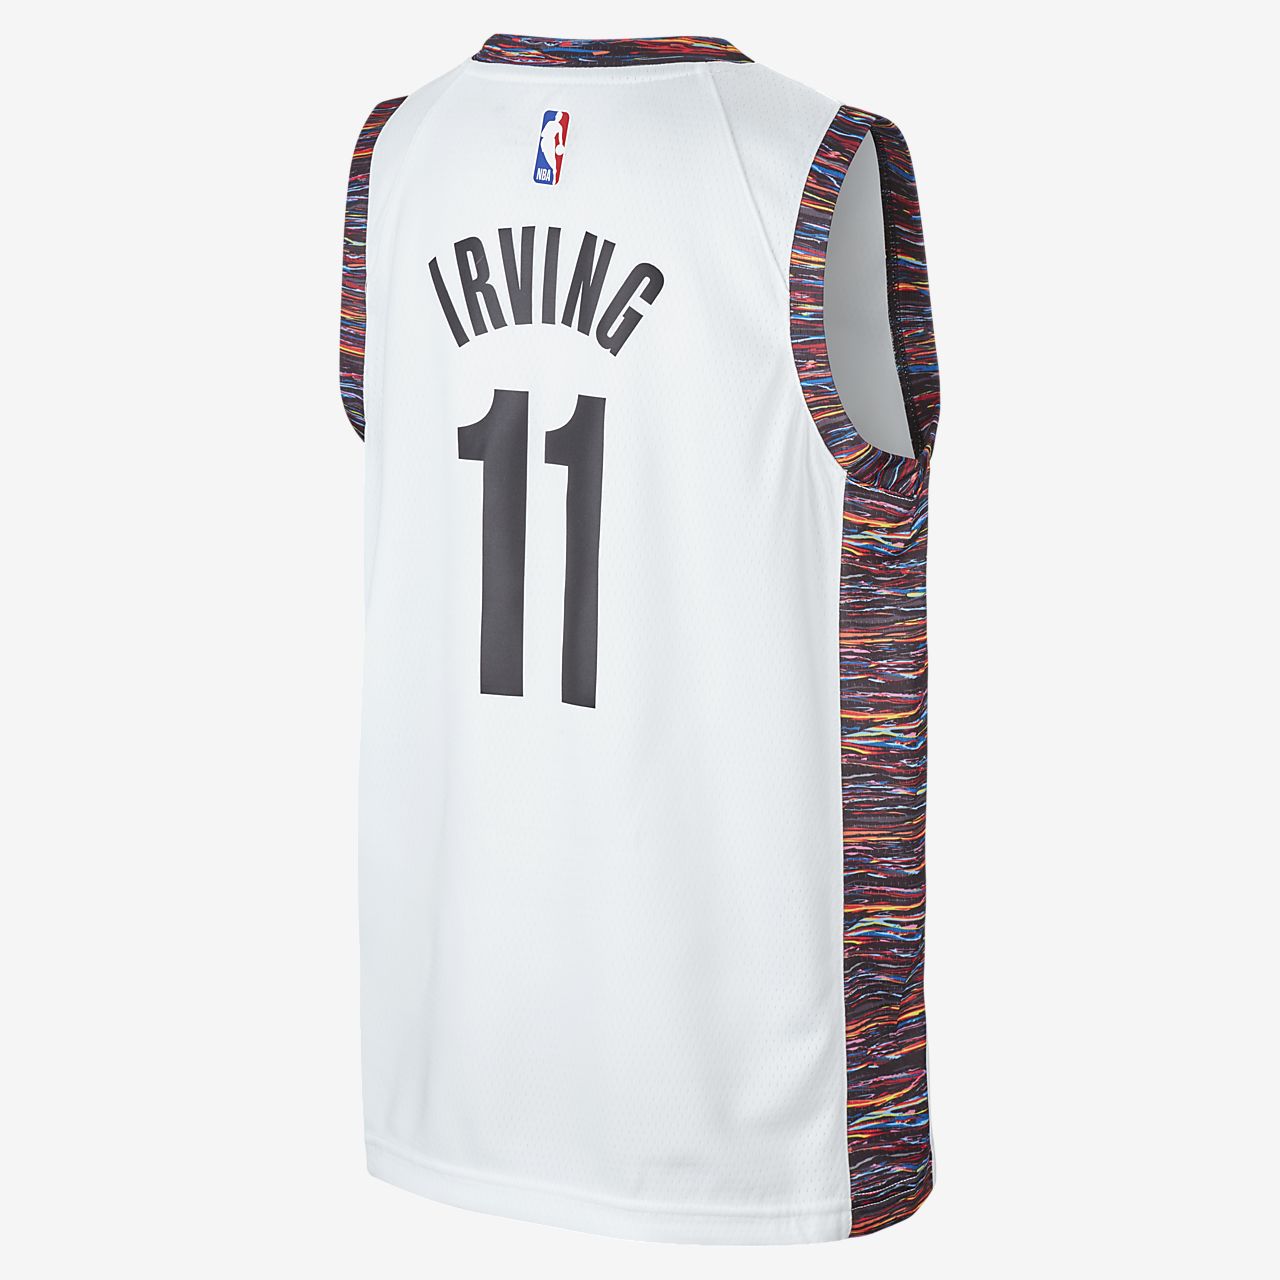 kyrie irving jersey bed stuy